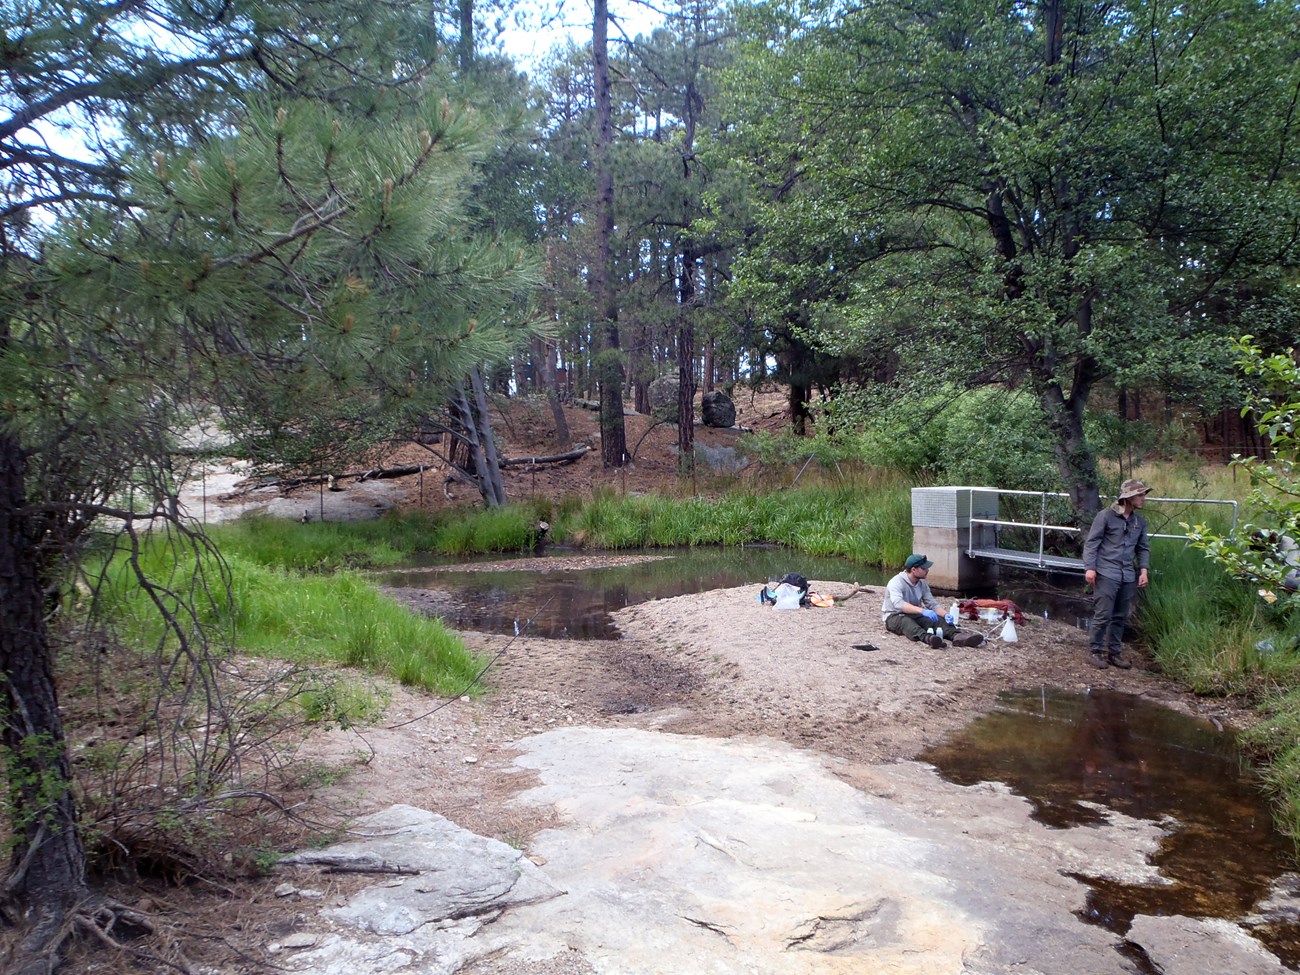 Two people next to a springbox and pump on a sand bar between shallow pools of water in a conifer forest.